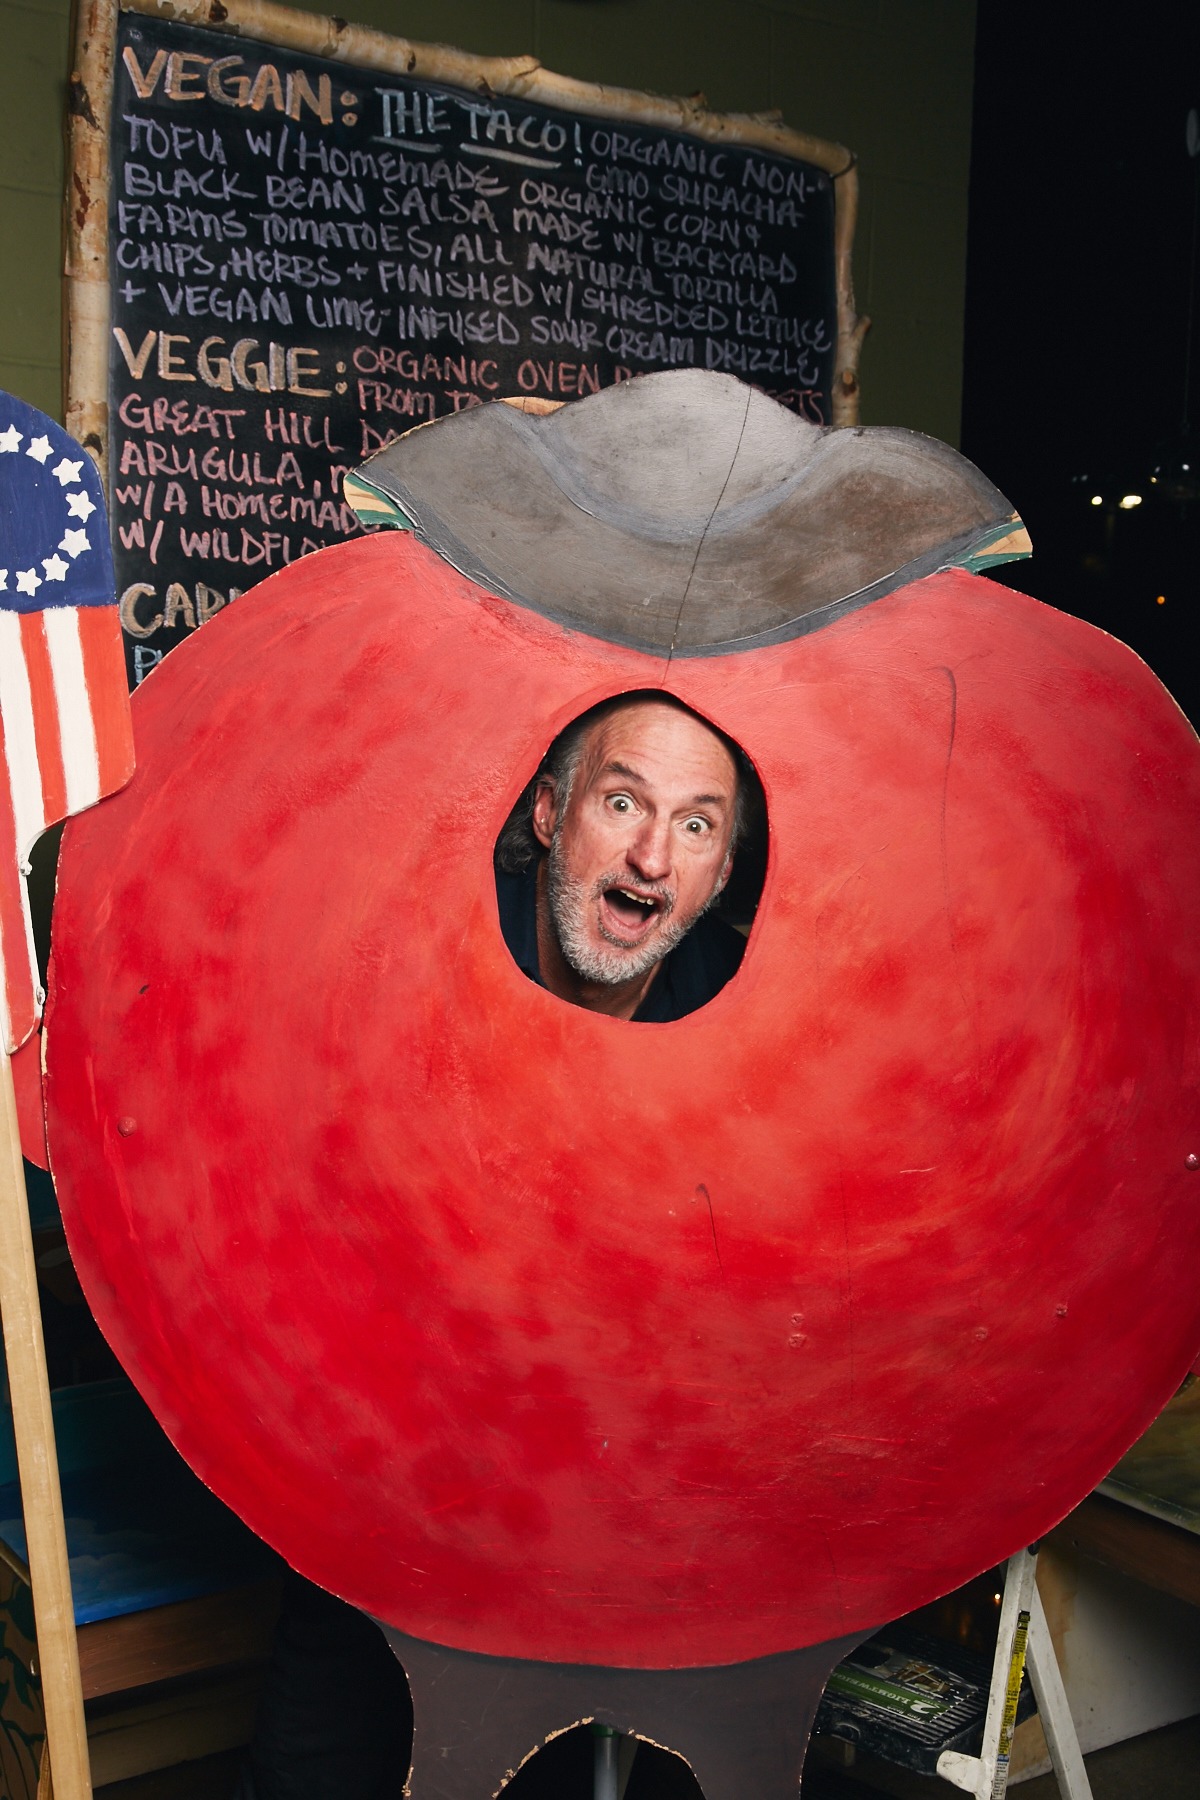 Founder Jay making a funny face in a tomato